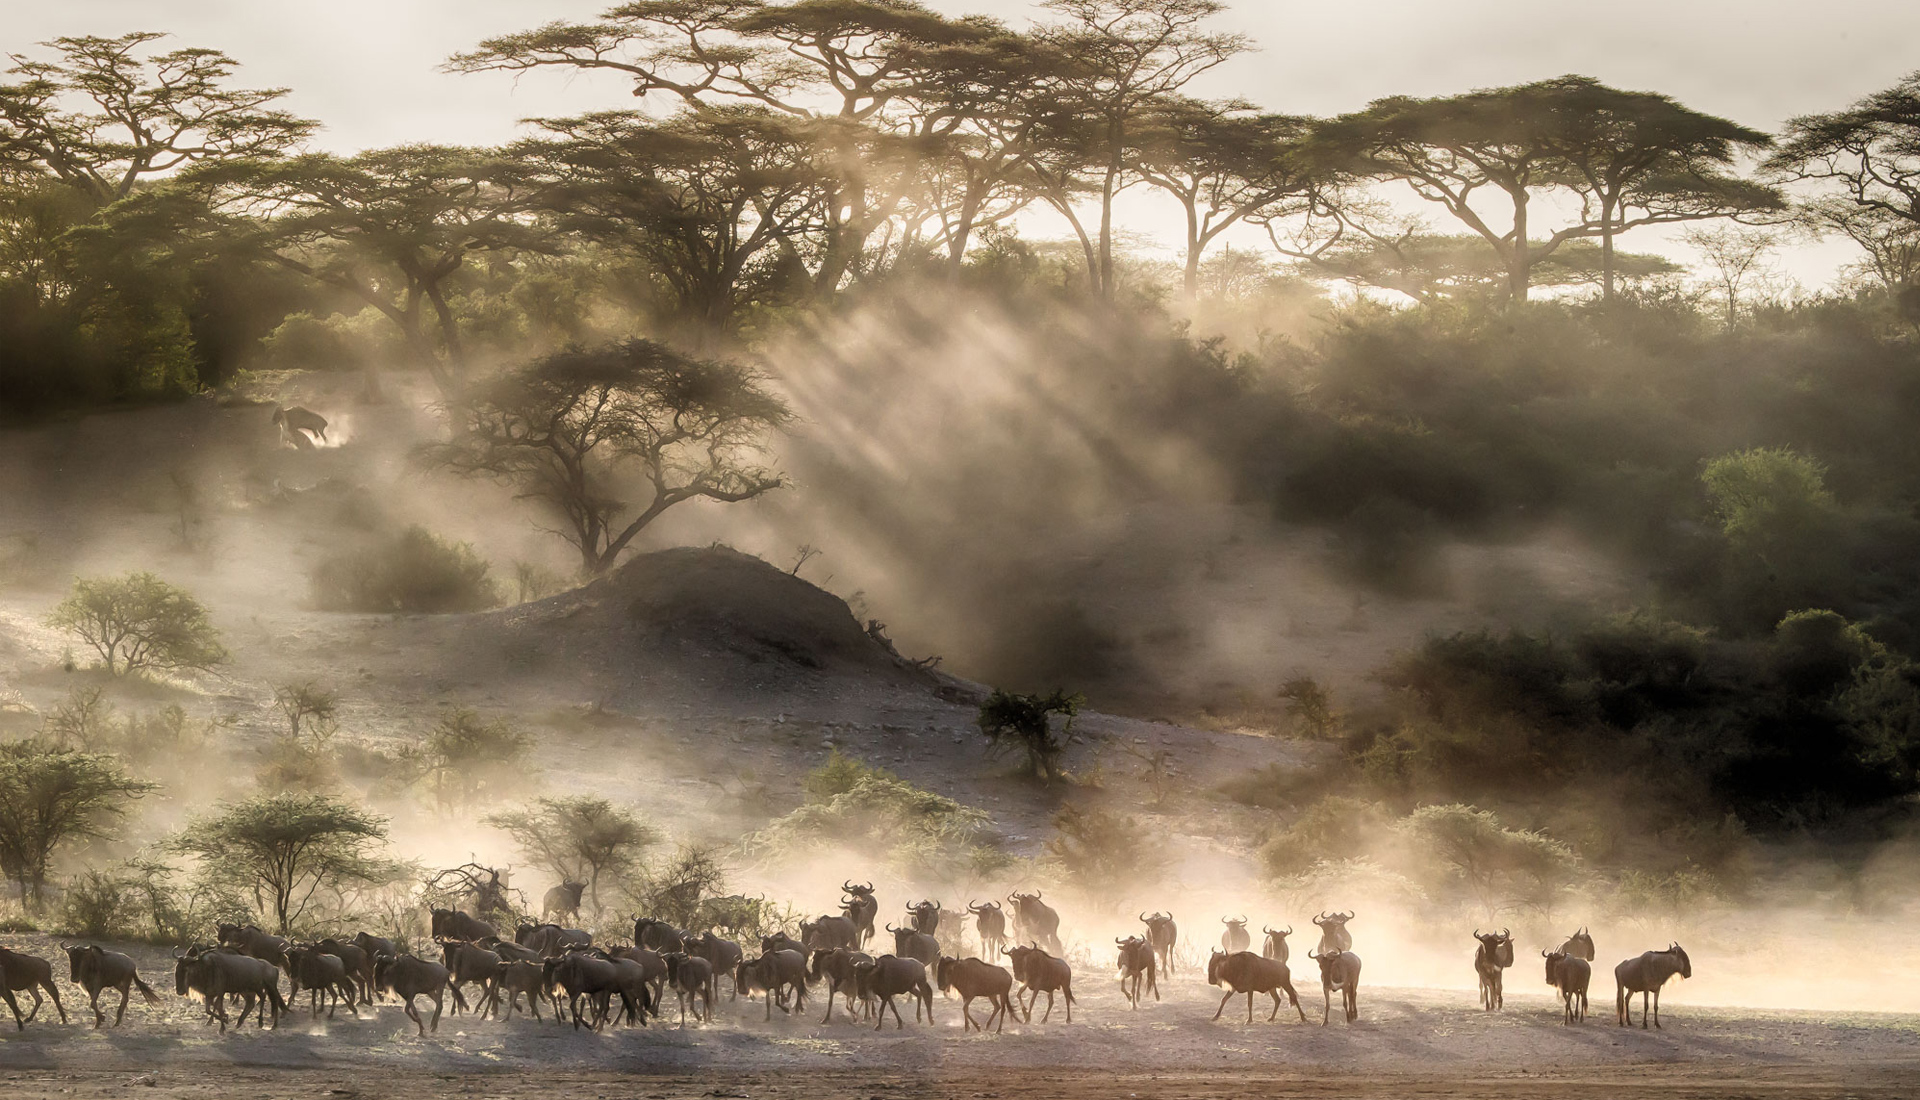 Atmospheric photography of wildebeest at Kleins Camp, Tanzania